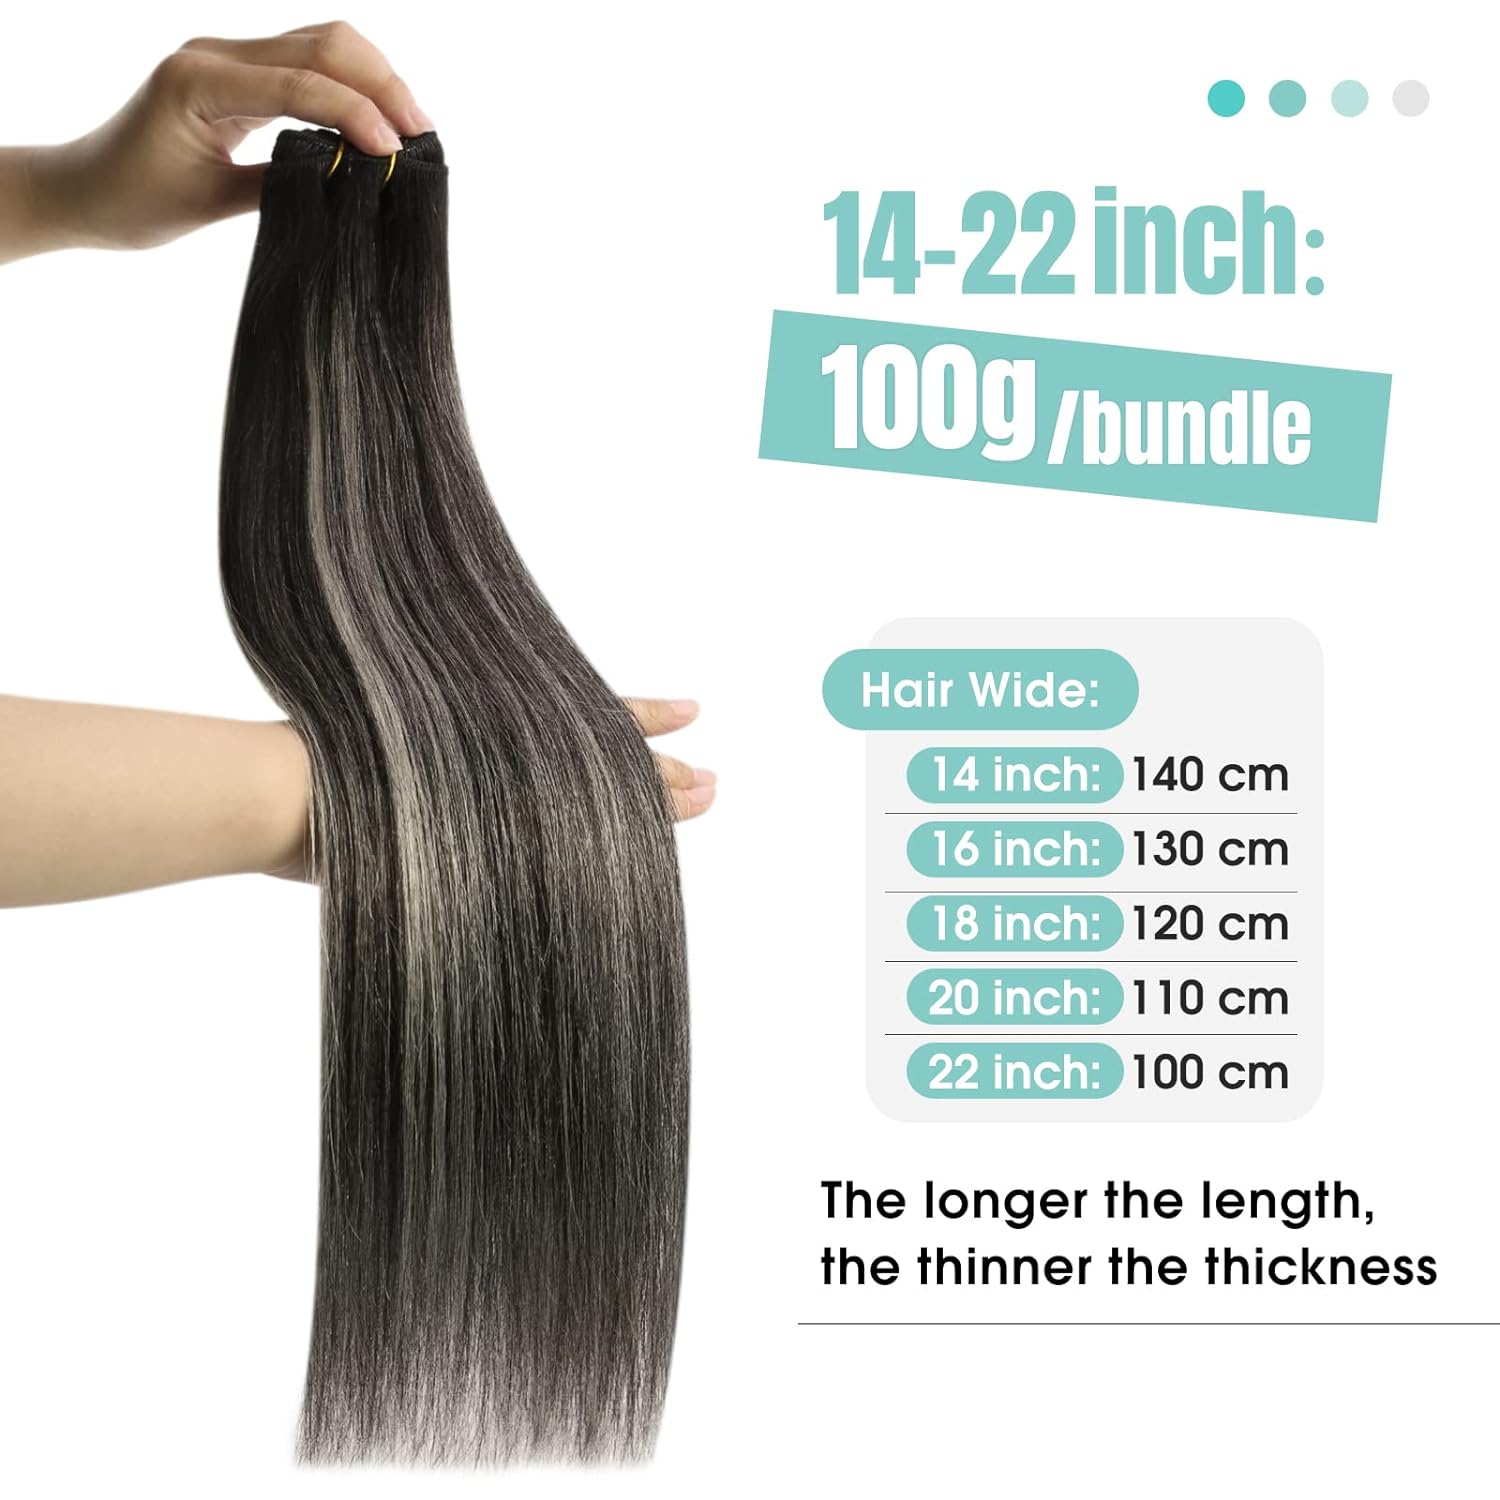 1B Natural Gray Human Hair Sew-In Weft Extensions Sew in Hair Extensions Ombre Black Weft Hair Extensions Human Hair Sew in Real Hair Extensions Blend of Black and Silver with Black Roots Weft Hair.